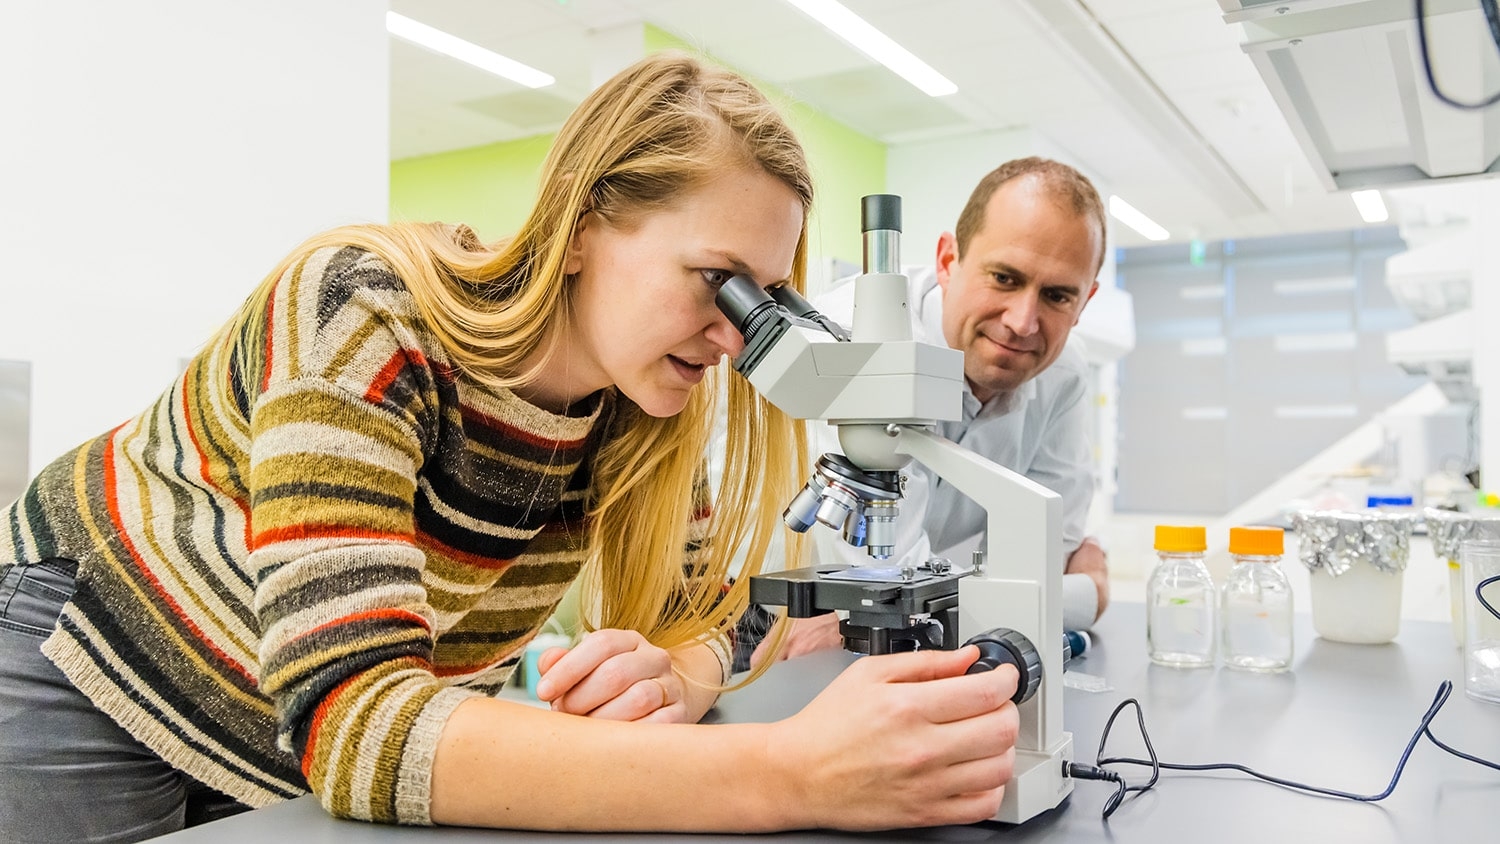 Postdoctoral researcher Lisa Van den Broeck looks into a microscope while STEPS Center director Jacob Jones watches on by her side..